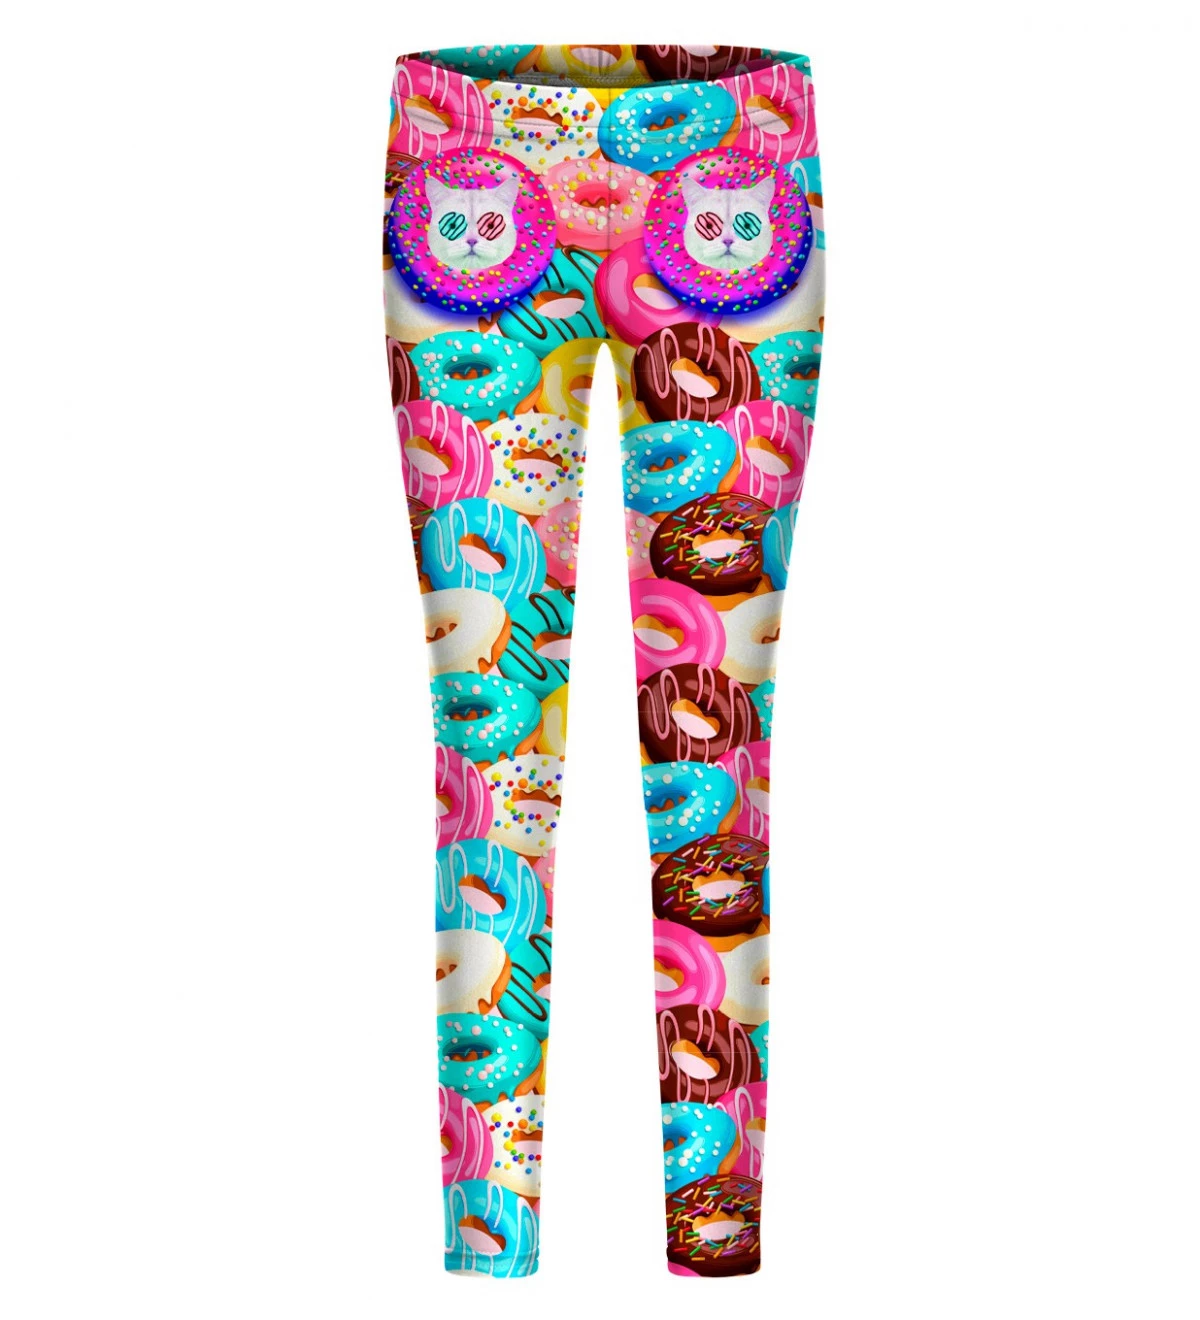  Girls' Leggings Girls Stretch Leggings Cute Cat Kitten Print  Cartoon Children's Yoga Pants Clothes Kids Running Dance Tights Place  Multicoloured : Clothing, Shoes & Jewelry